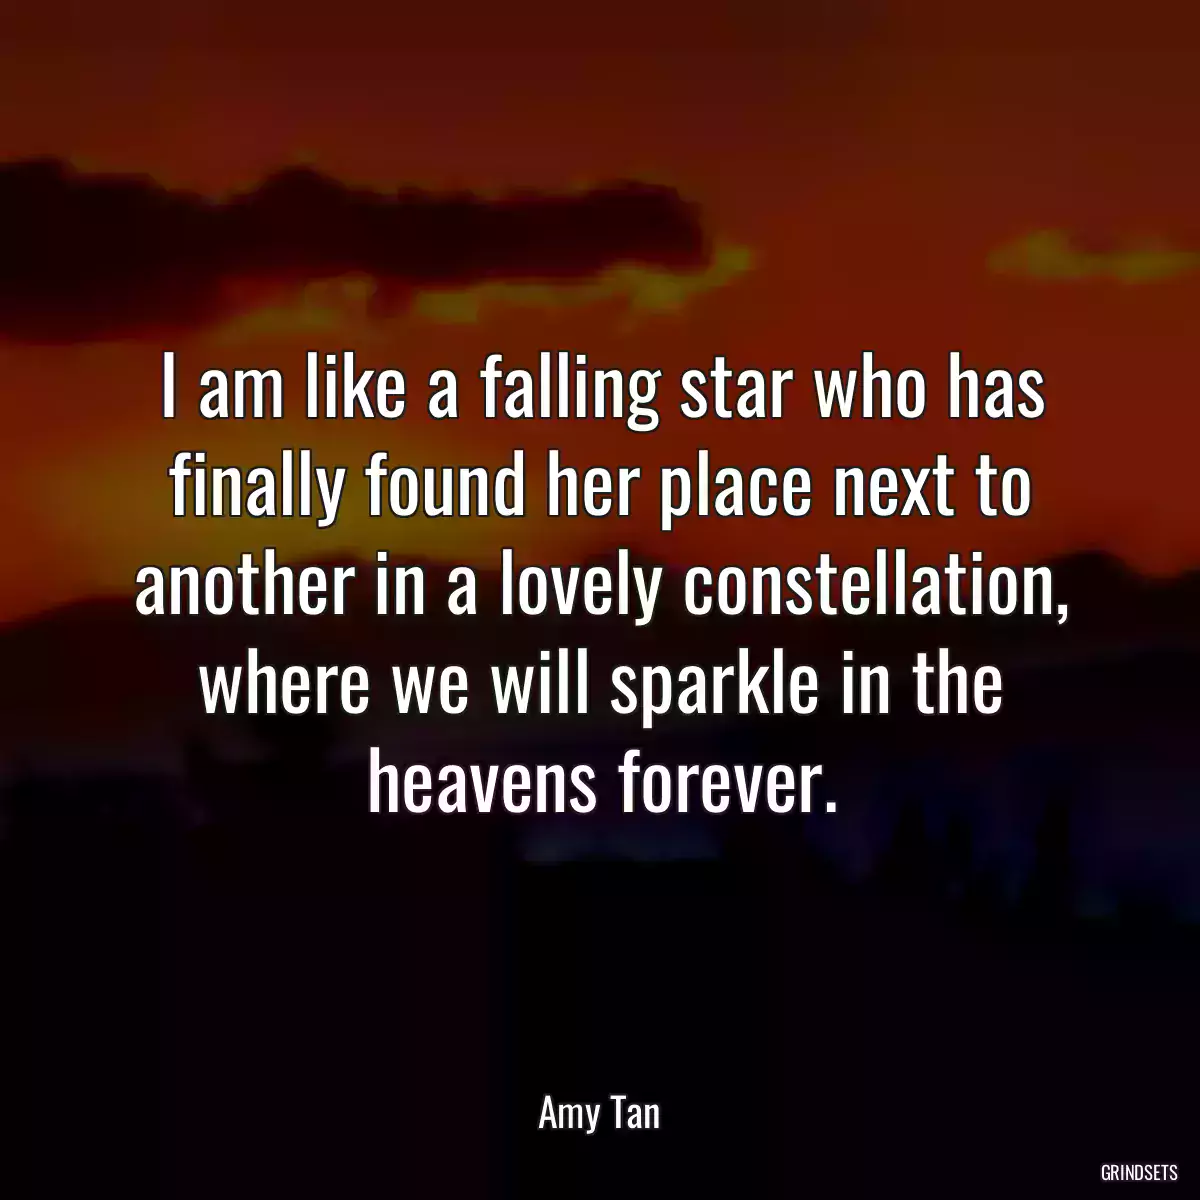 I am like a falling star who has finally found her place next to another in a lovely constellation, where we will sparkle in the heavens forever.